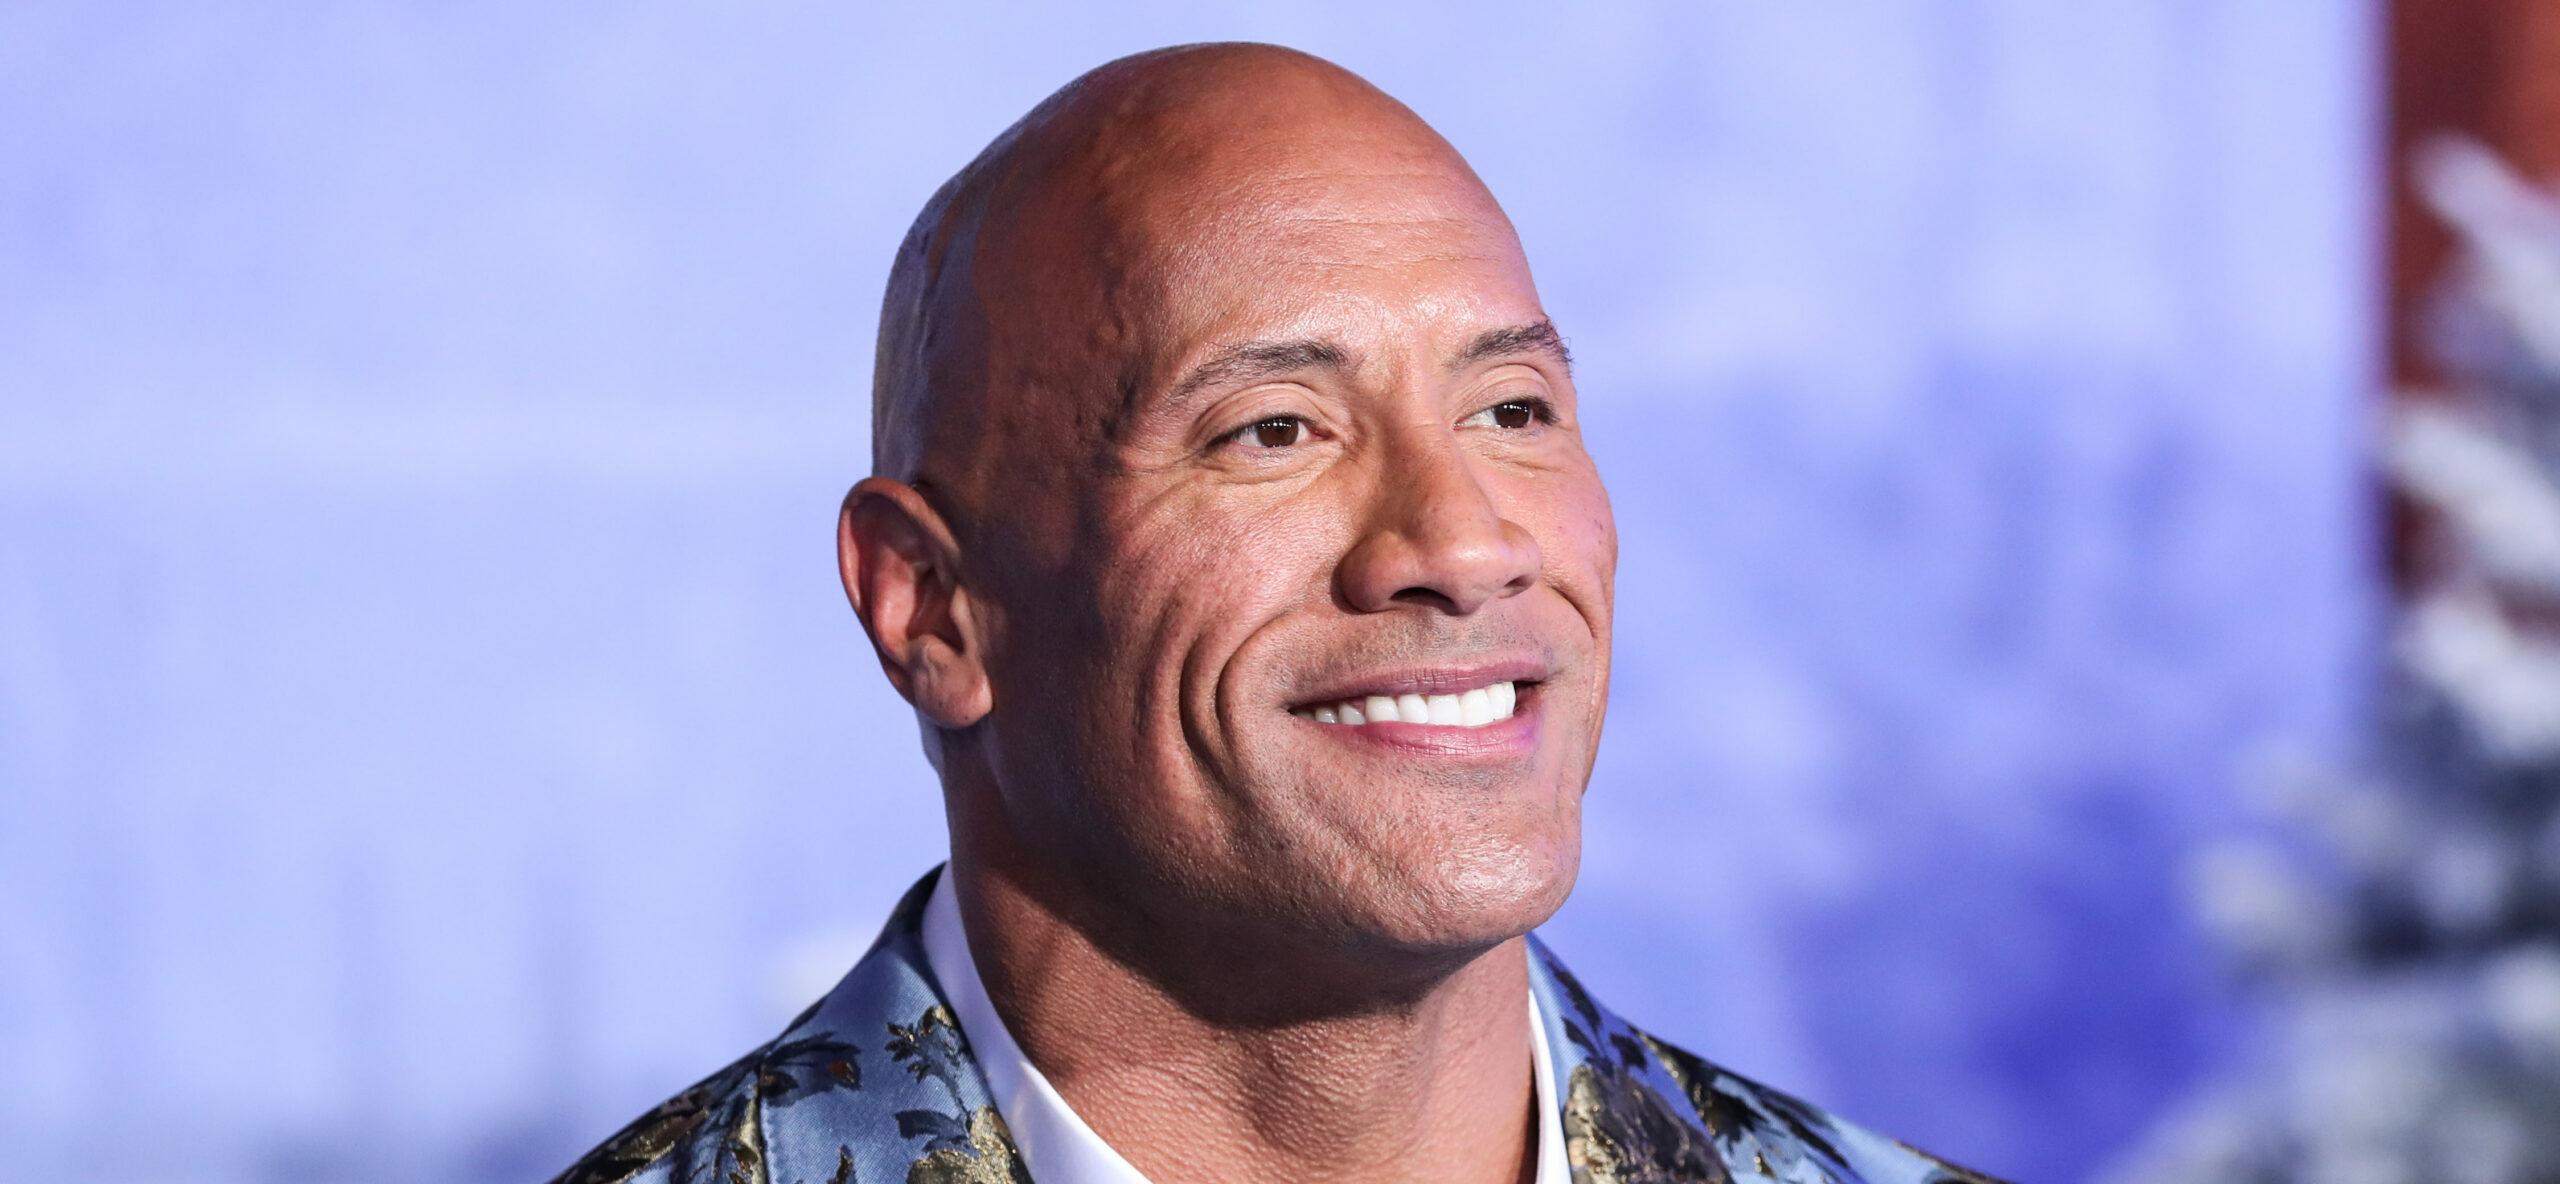 Dwayne Johnson at the World Premiere Of Columbia Pictures' 'Jumanji: The Next Level'